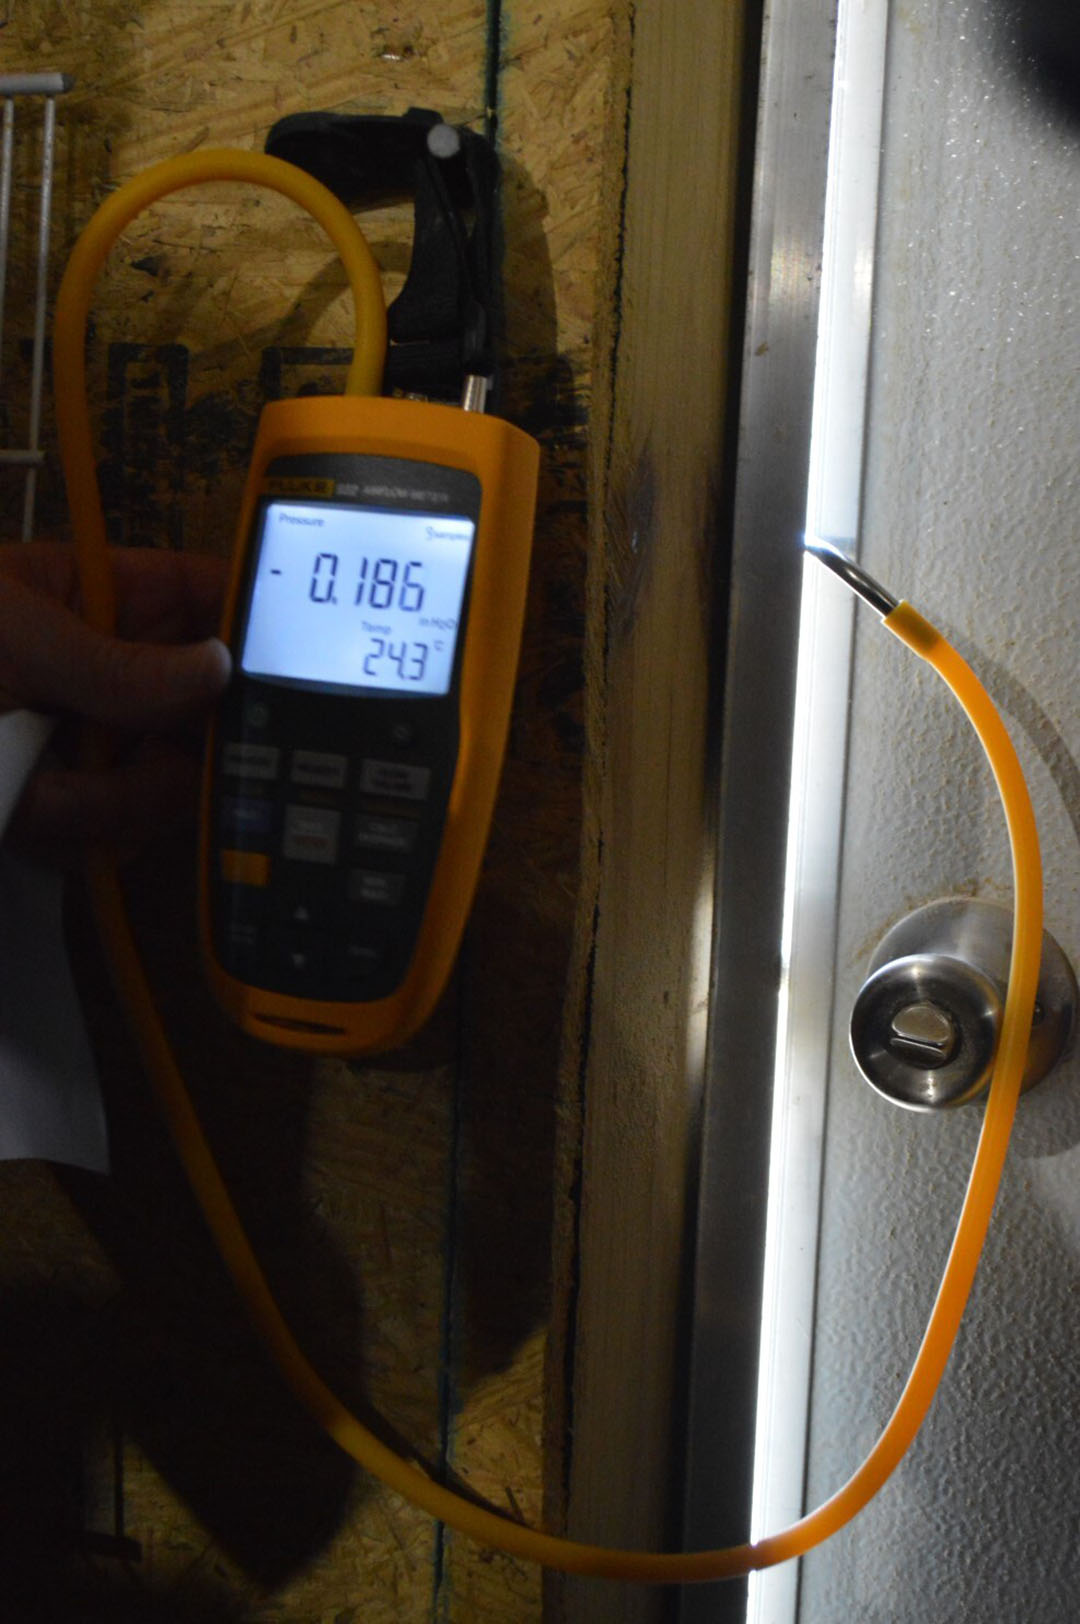 It is impossible to properly ventilate a house that doesn’t seal well. Check how well sealed the house is by using a very simple pressure evaluation test.